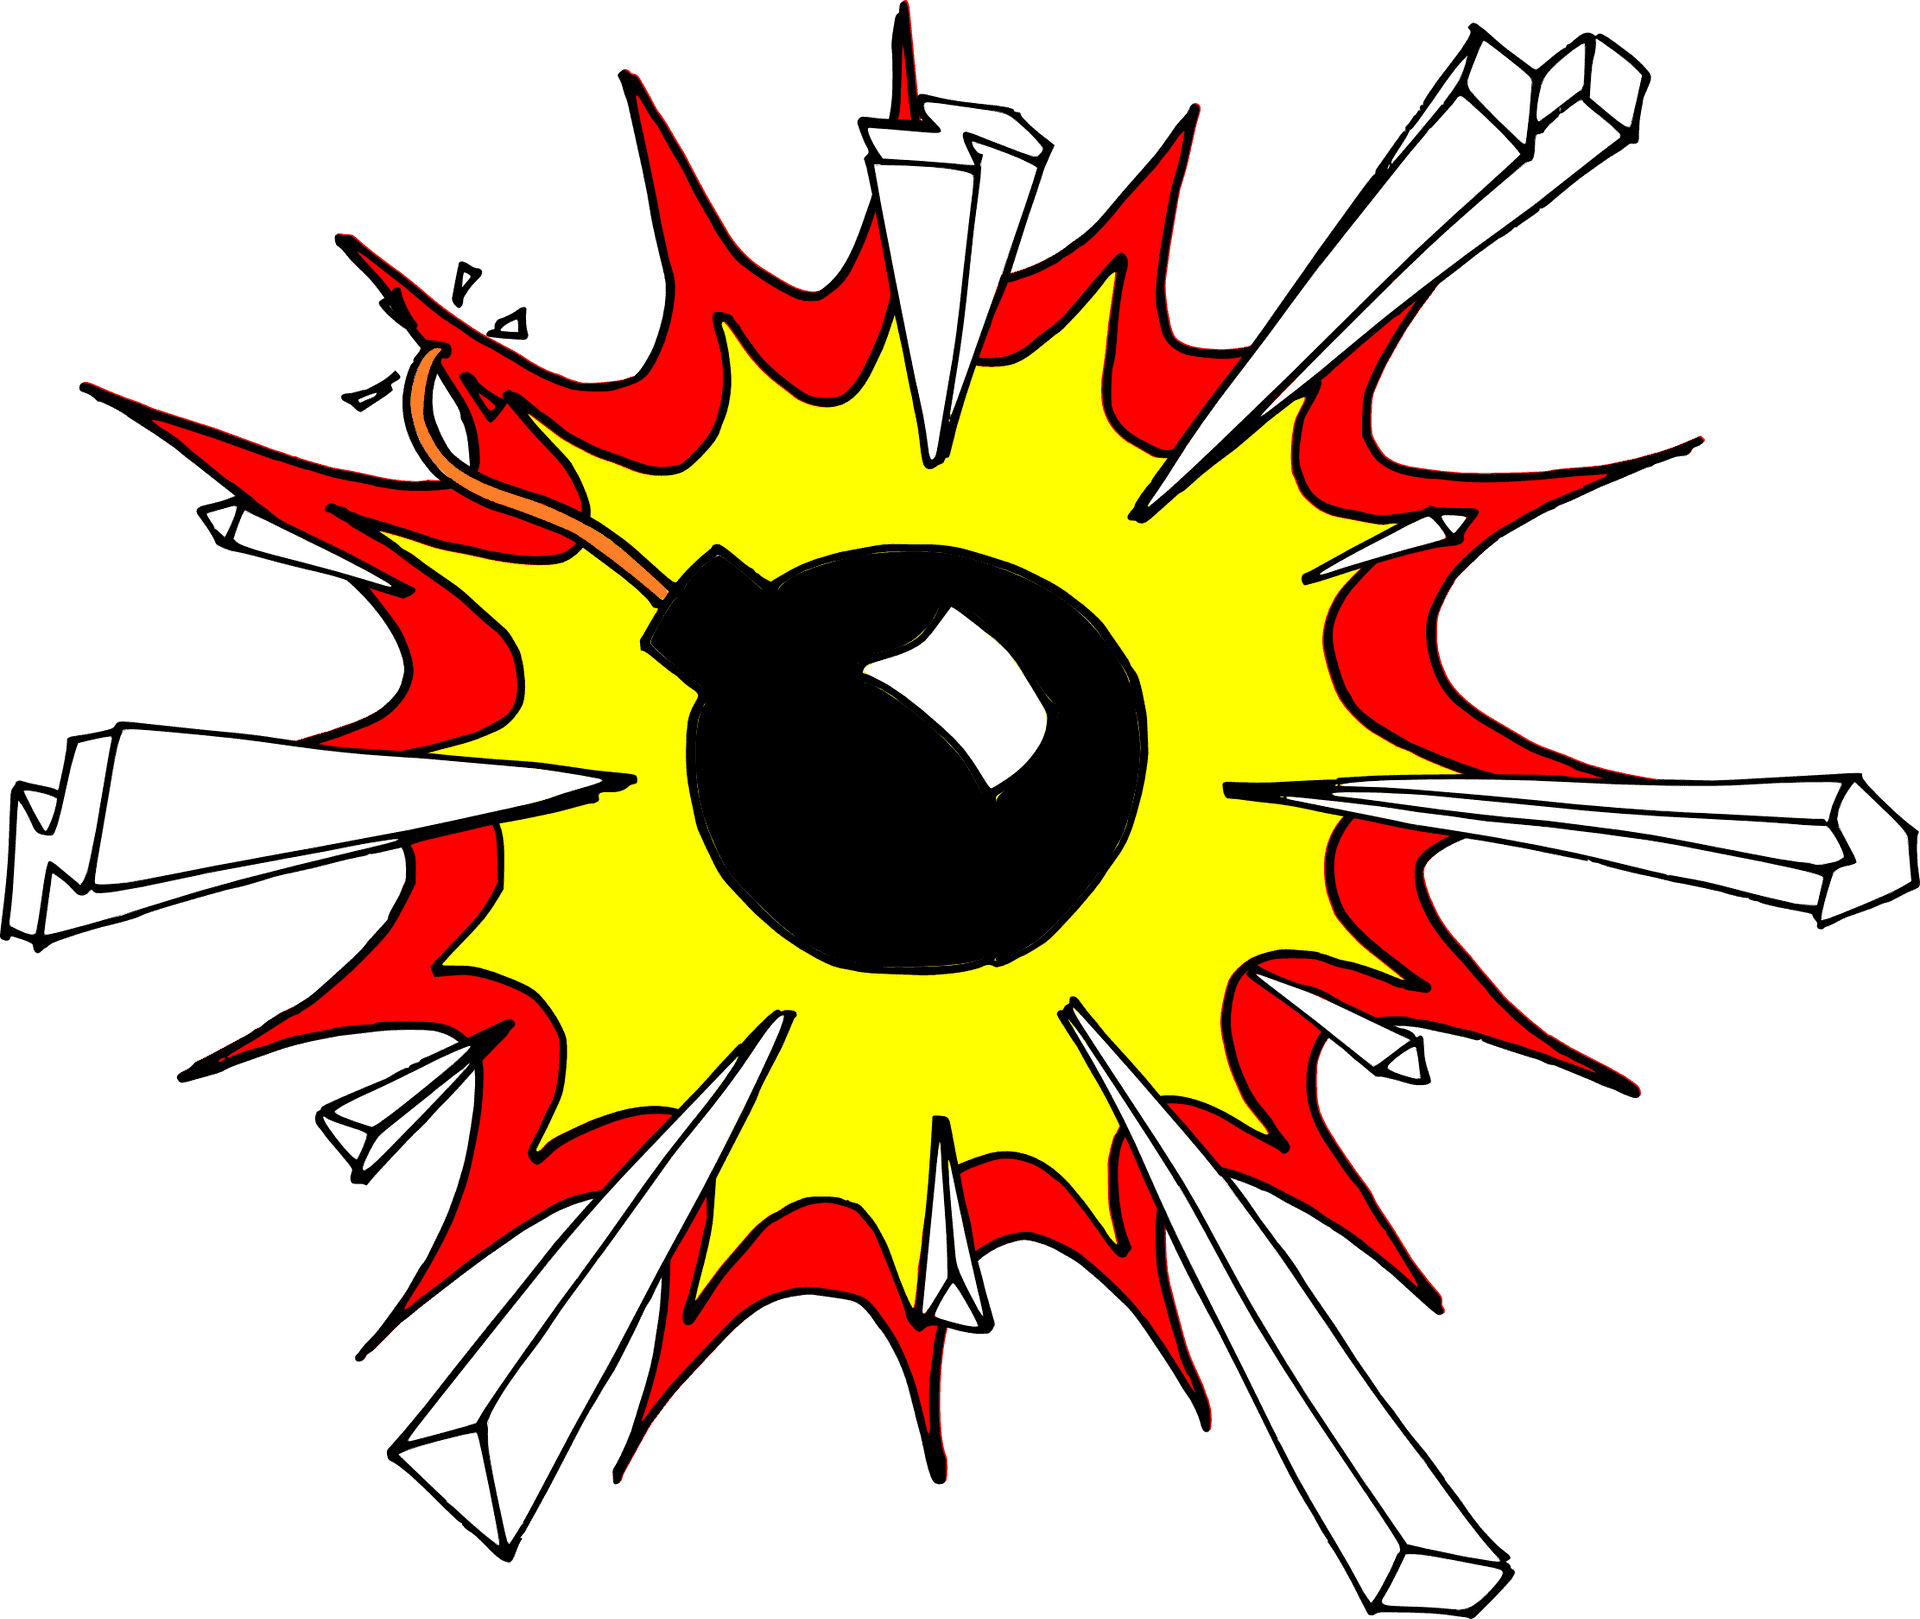 Comic Style Bomb Explosion PNG image